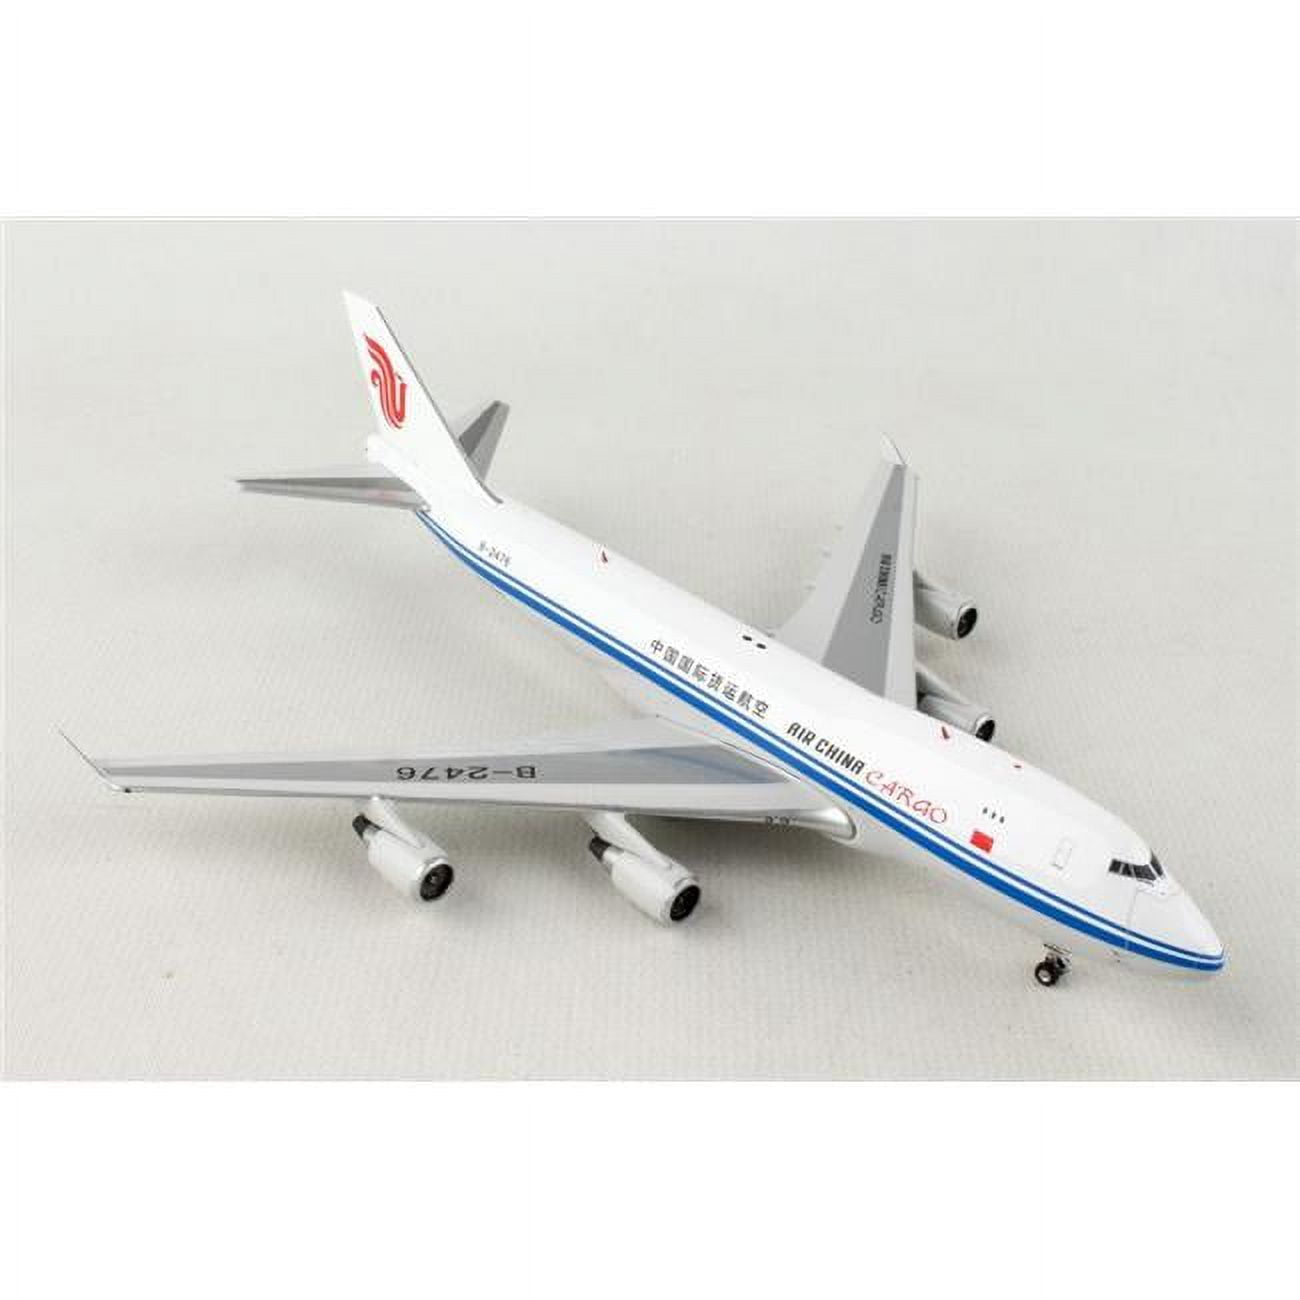 Picture of Phoenix PH2254 1-400 Scale Registration No.B-2476 Phoenix Air China Cargo 747-400F Model Aircraft Toy